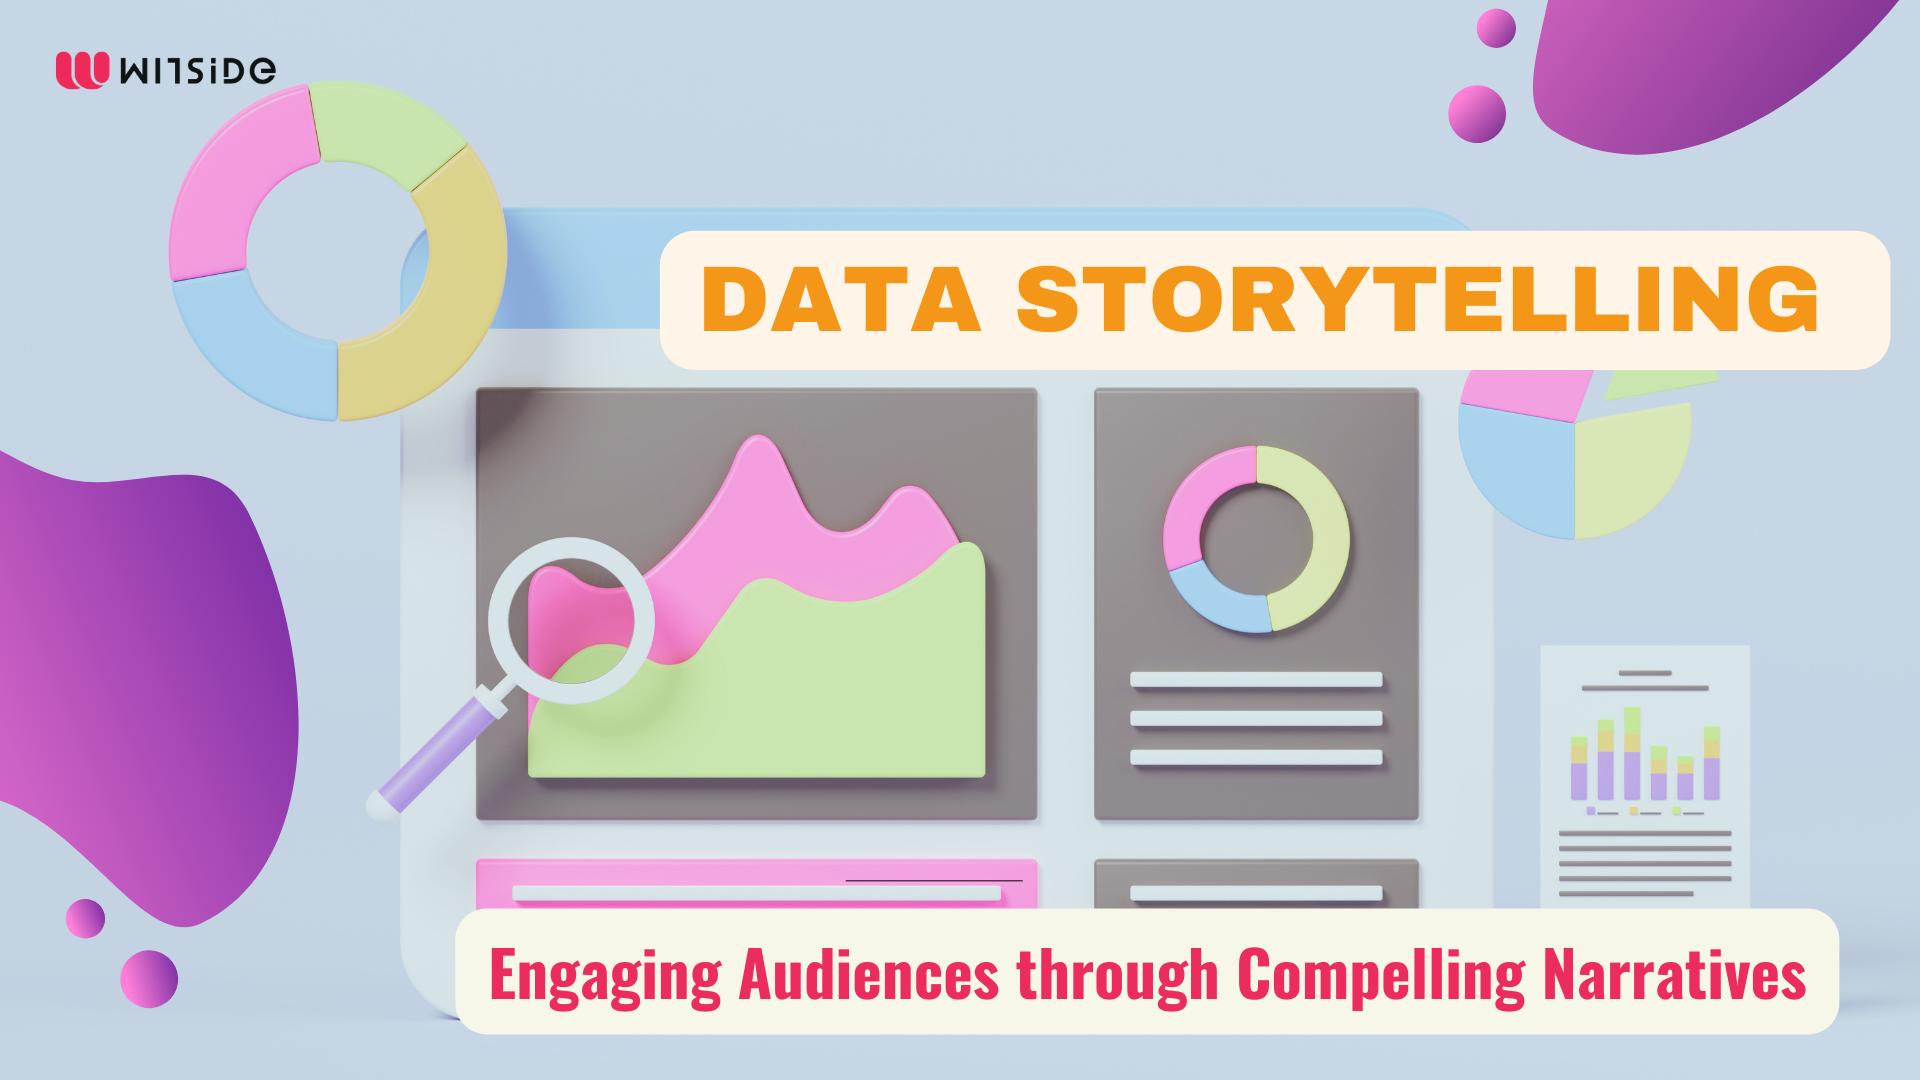 WITSIDE-data-story-telling-blog-Engaging-Audiences-through-Compelling-Narratives